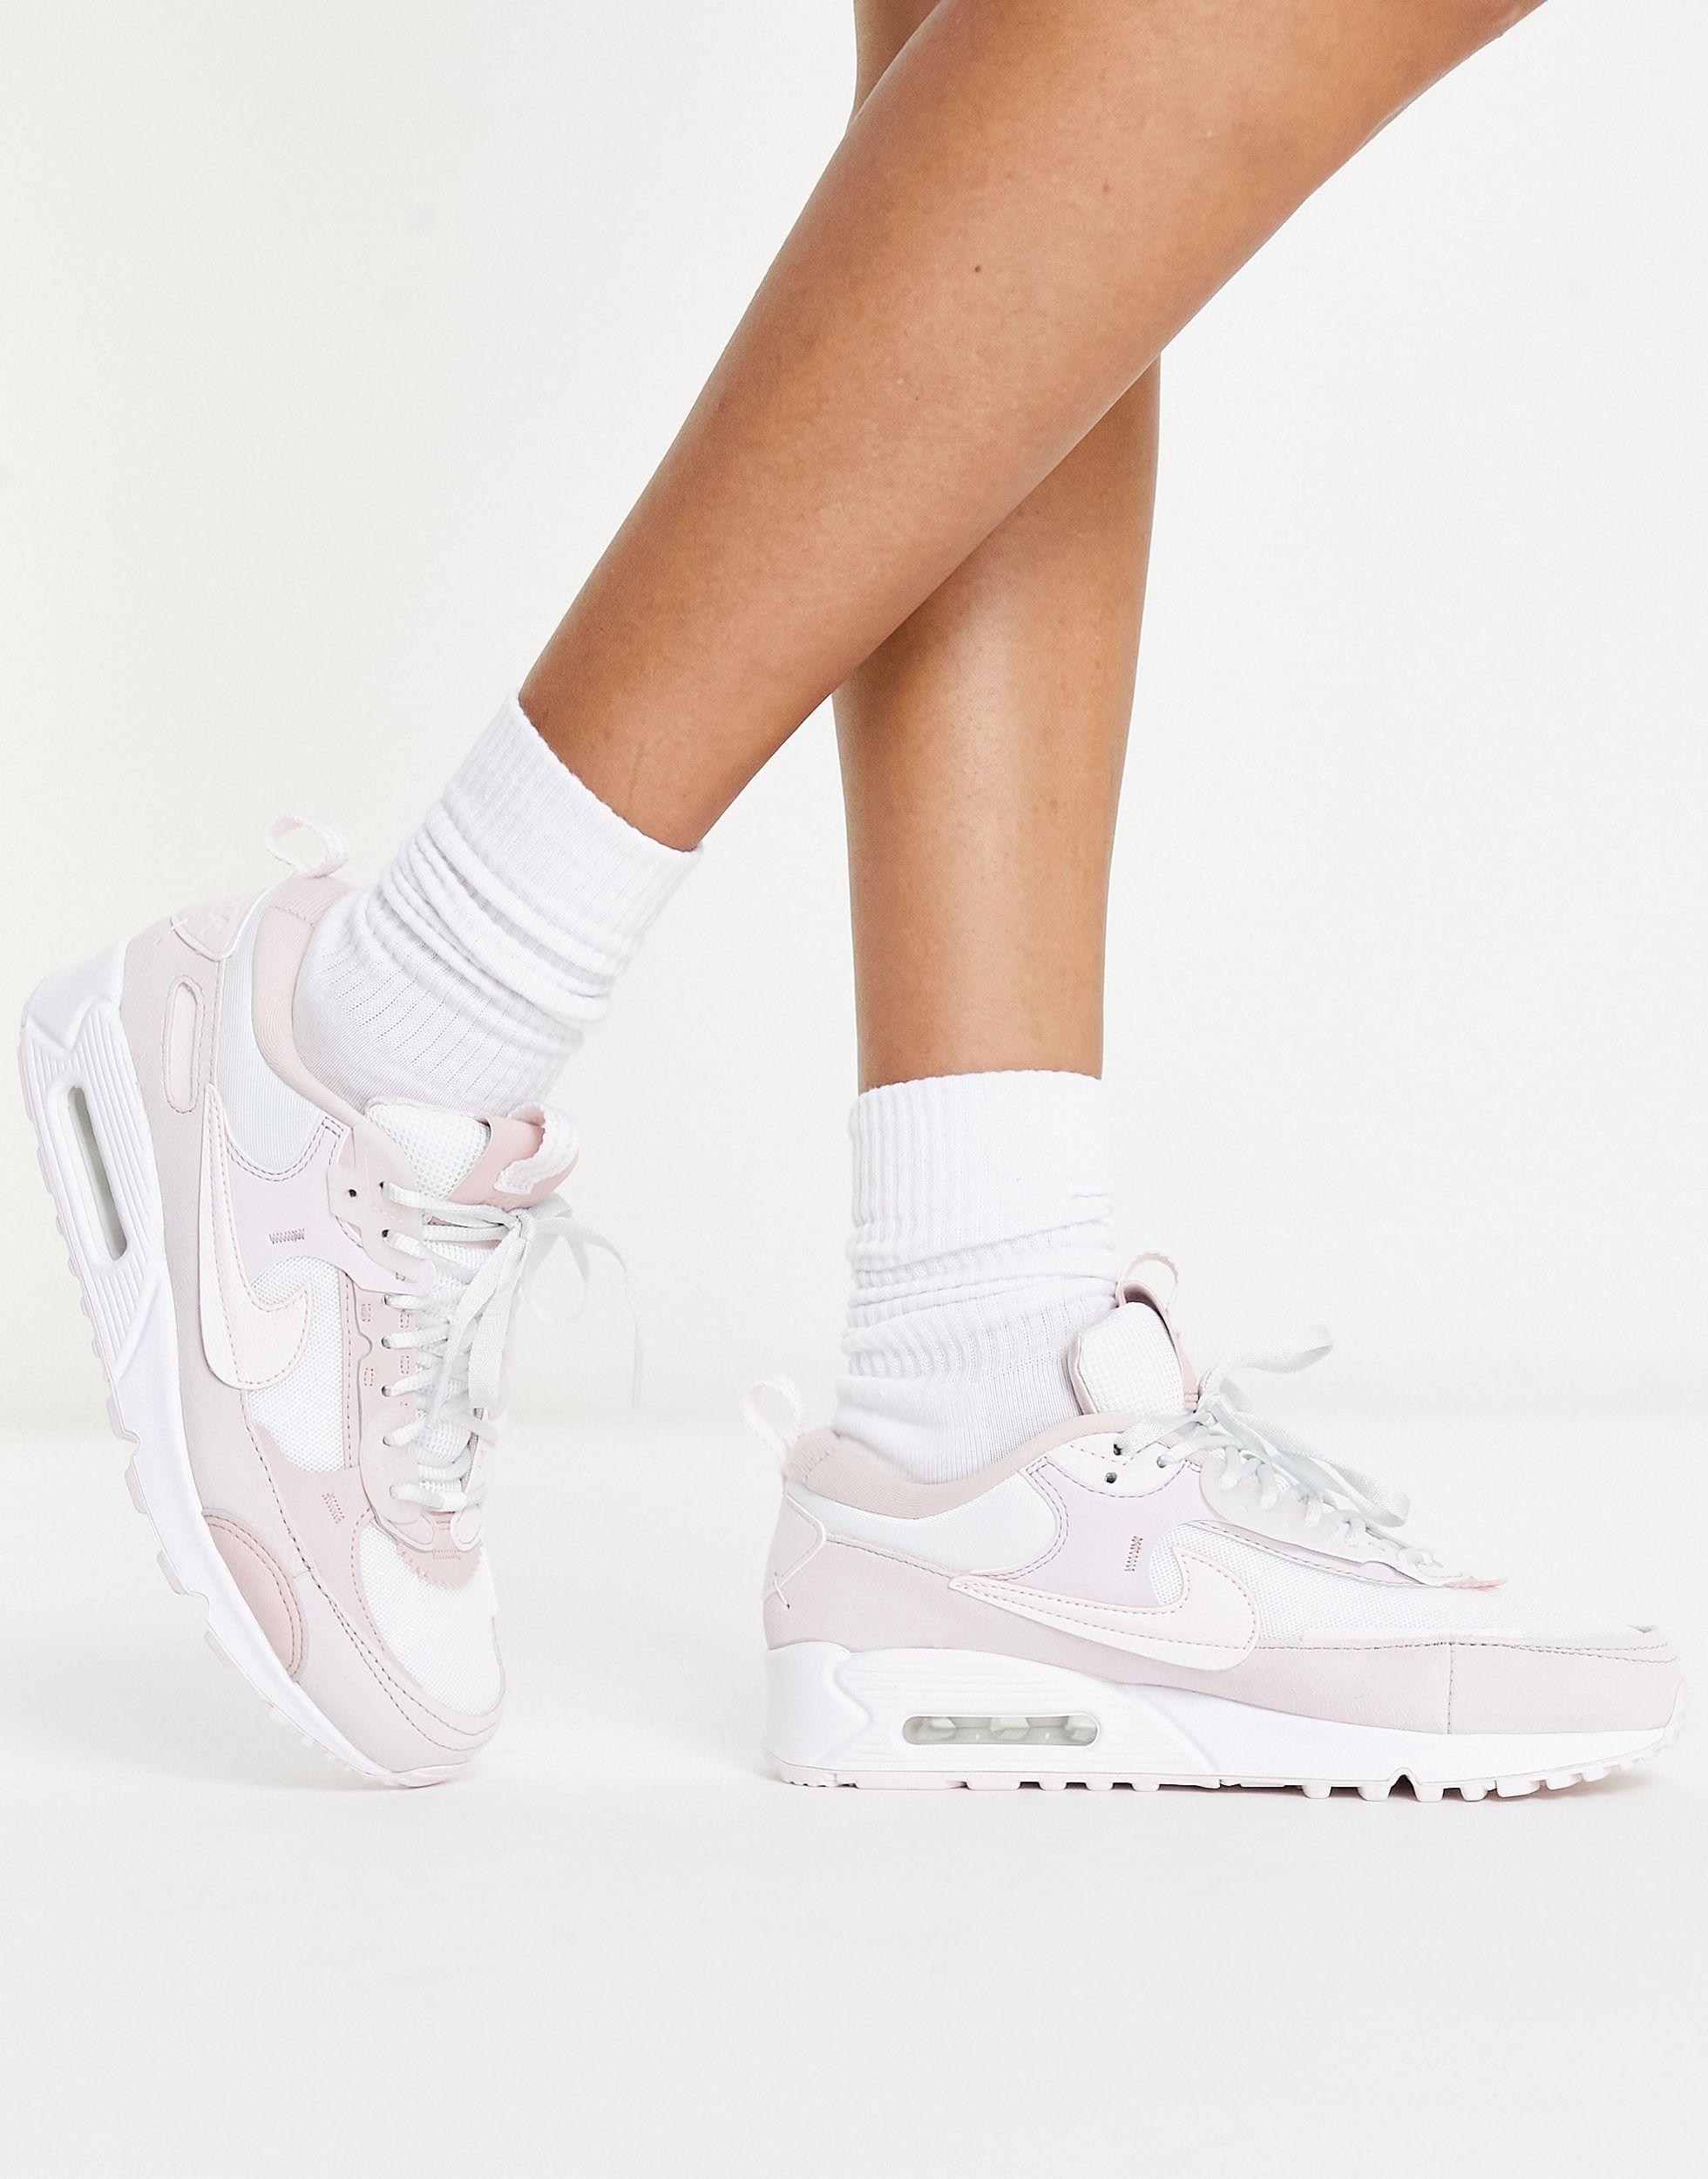 Nike Air Max 90 Futura Trainers in White | Lyst